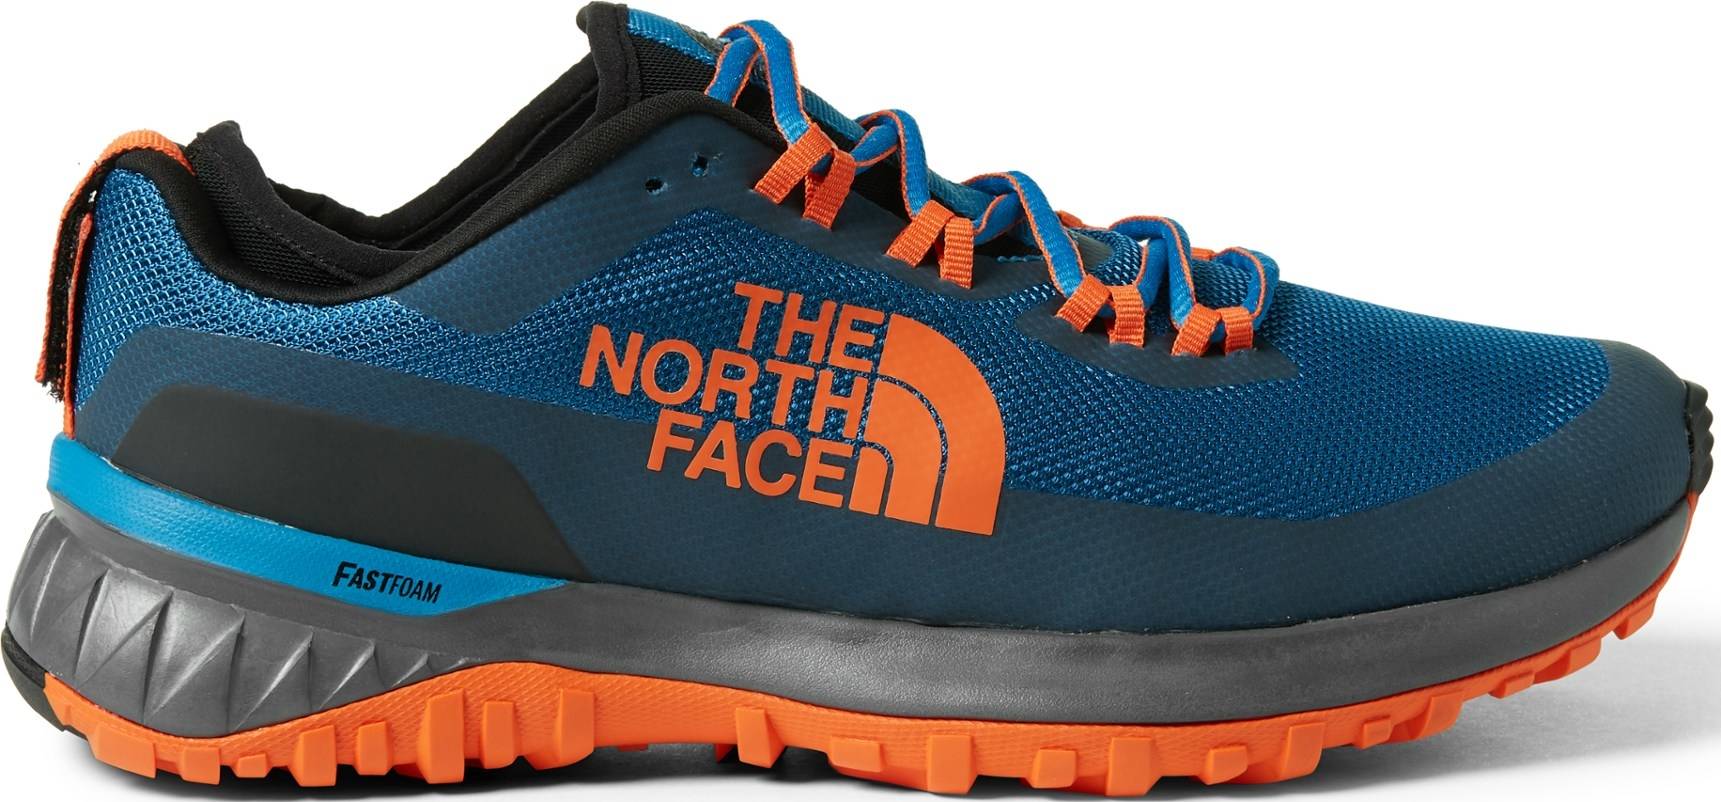 The North Face Ultra Traction - Deals 